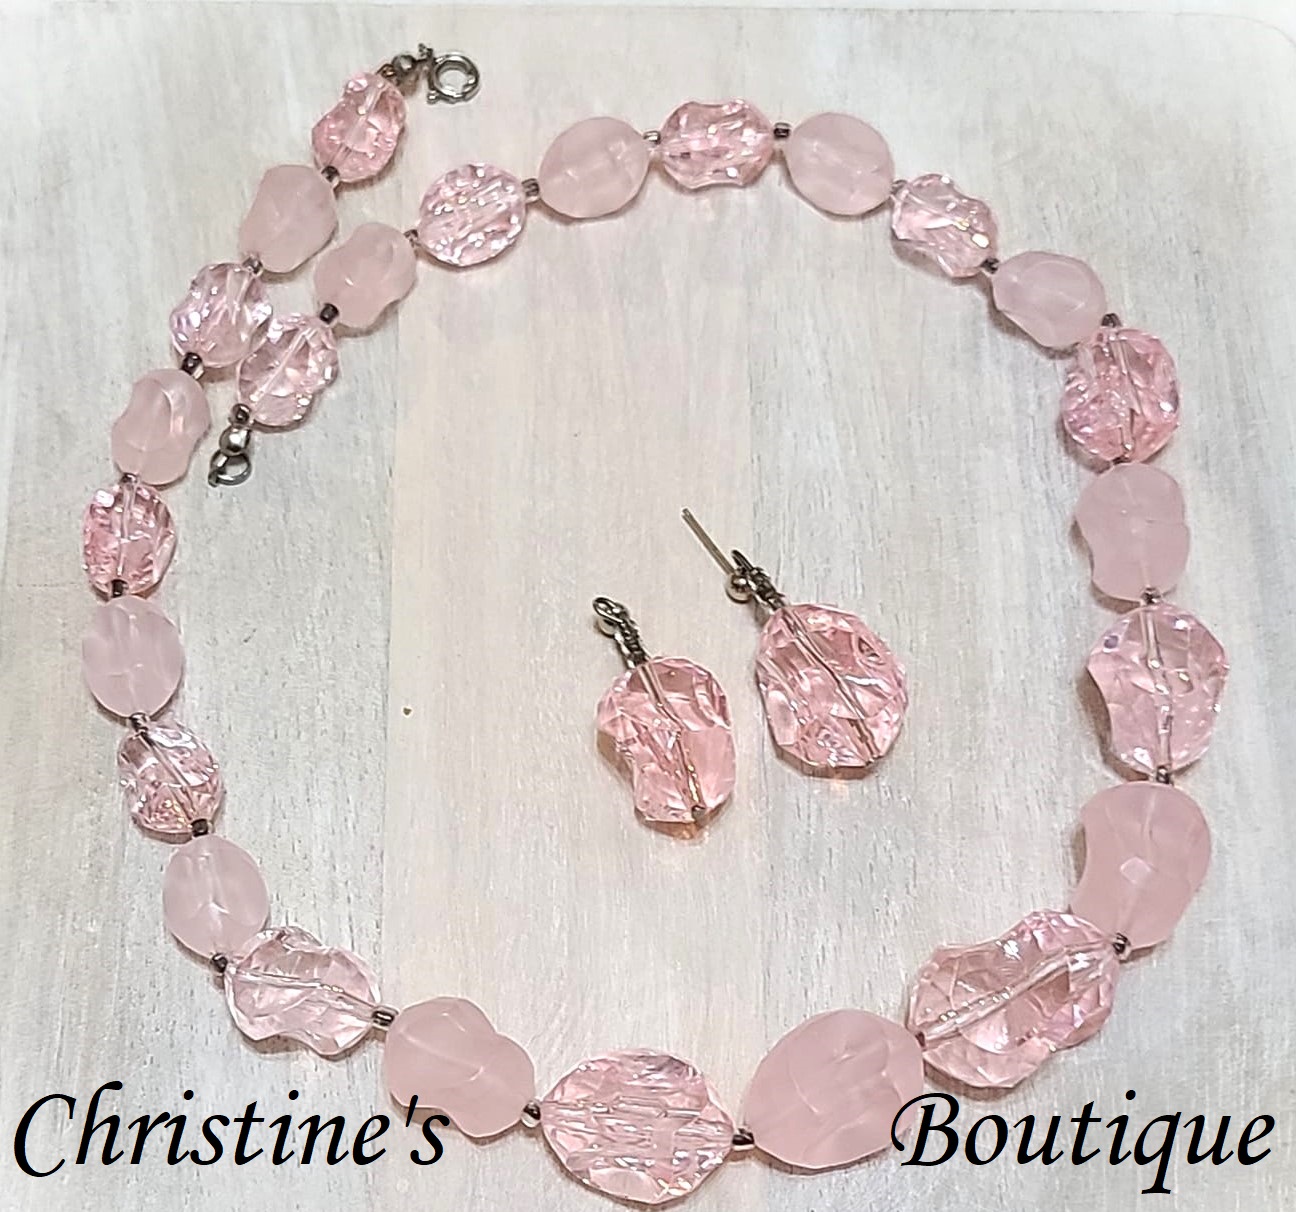 Pink Ice and Frost Nugget Necklace and Pierced Earrings